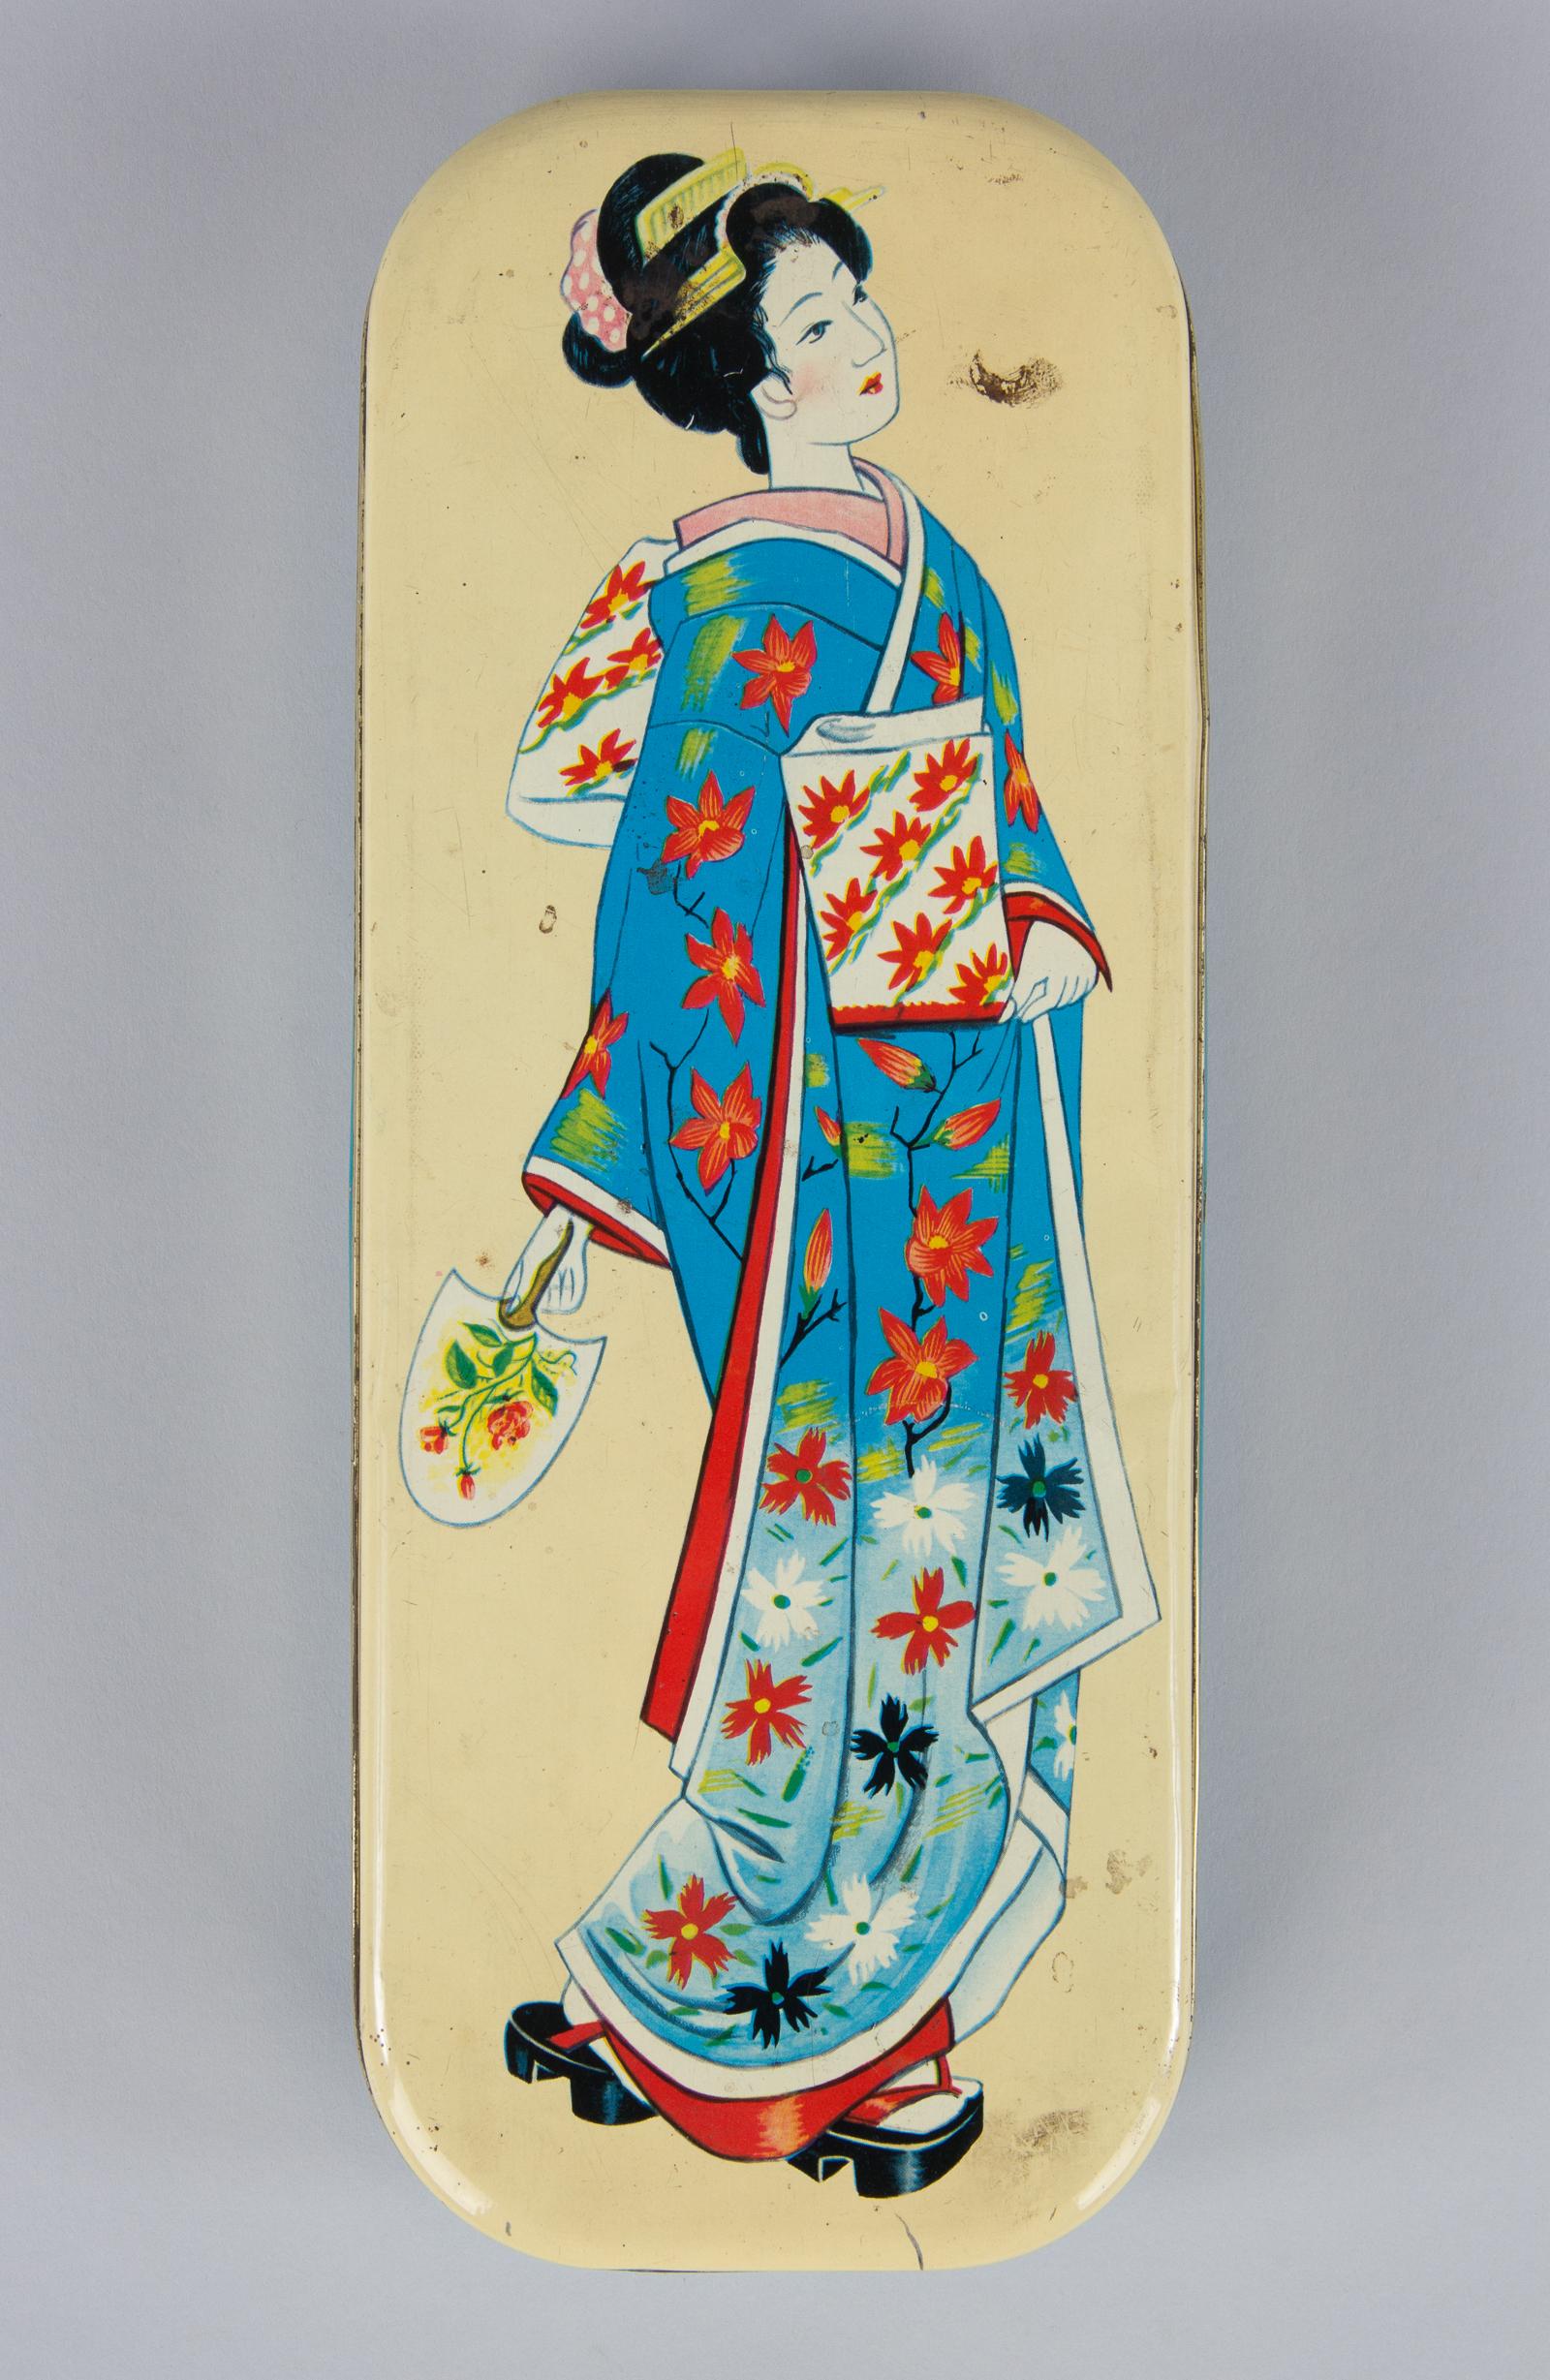 A colorful vintage Italian chocolate candy tin with geisha decoration, 20th century. The long, rectangular tin box is from the Motta company and held various flavors of chocolate bonbons. Full color decoration includes a beautiful depiction of a